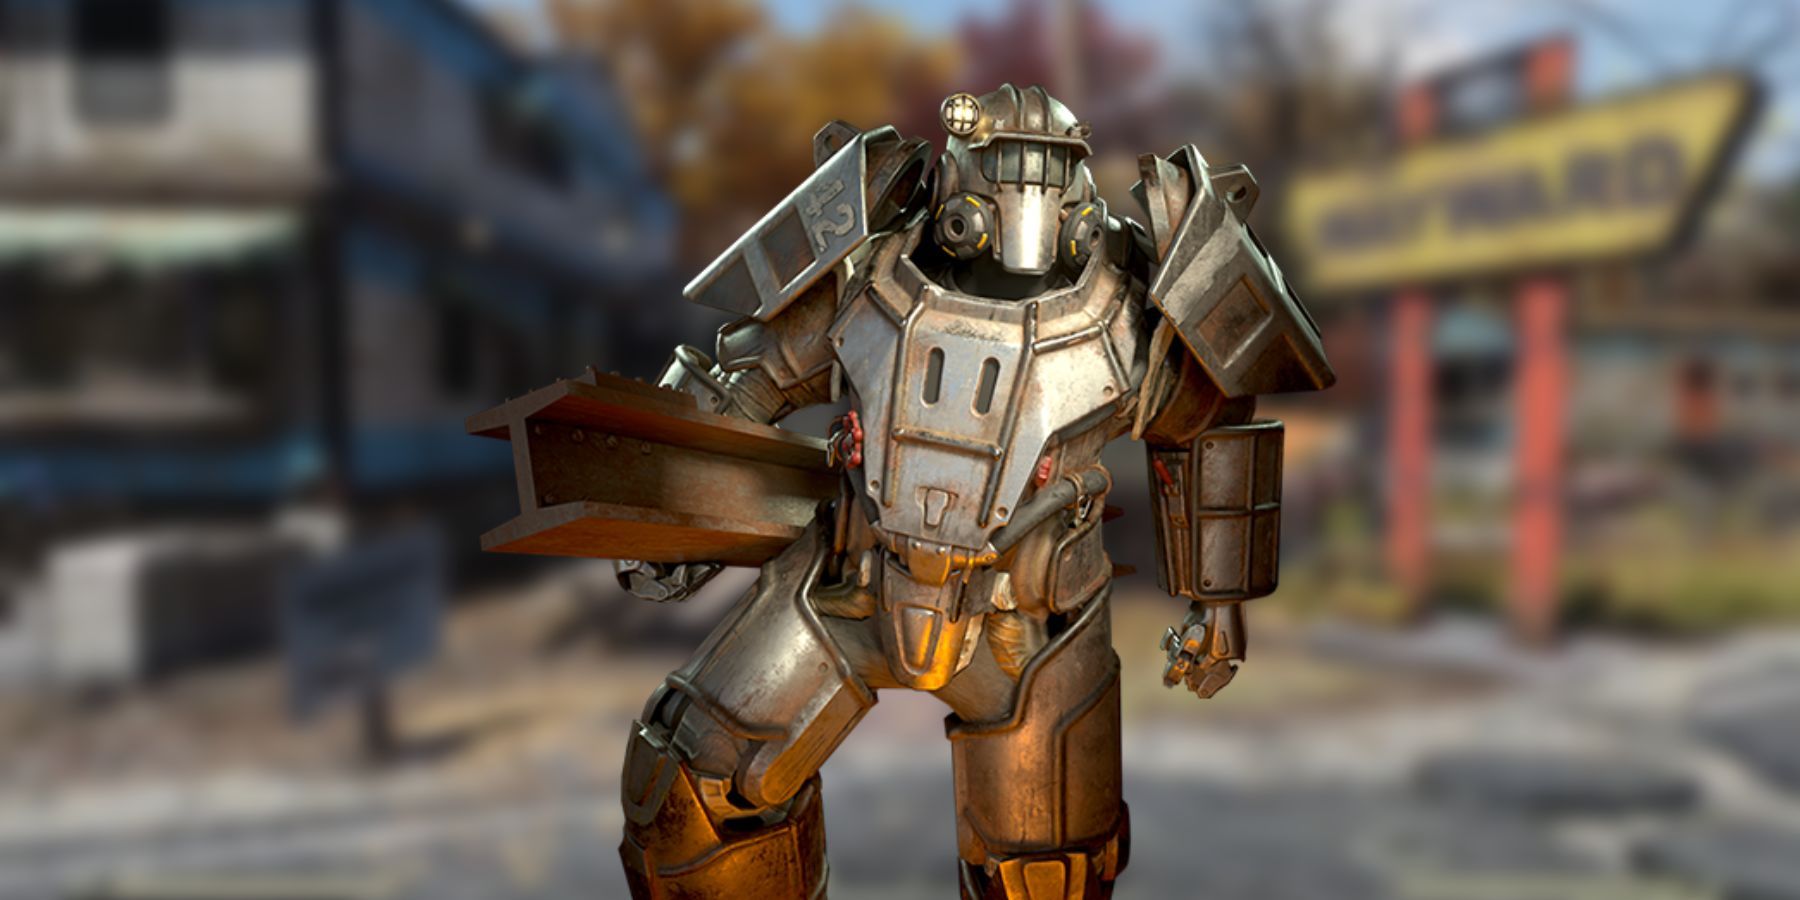 image showing the union power armor in fallout 76.